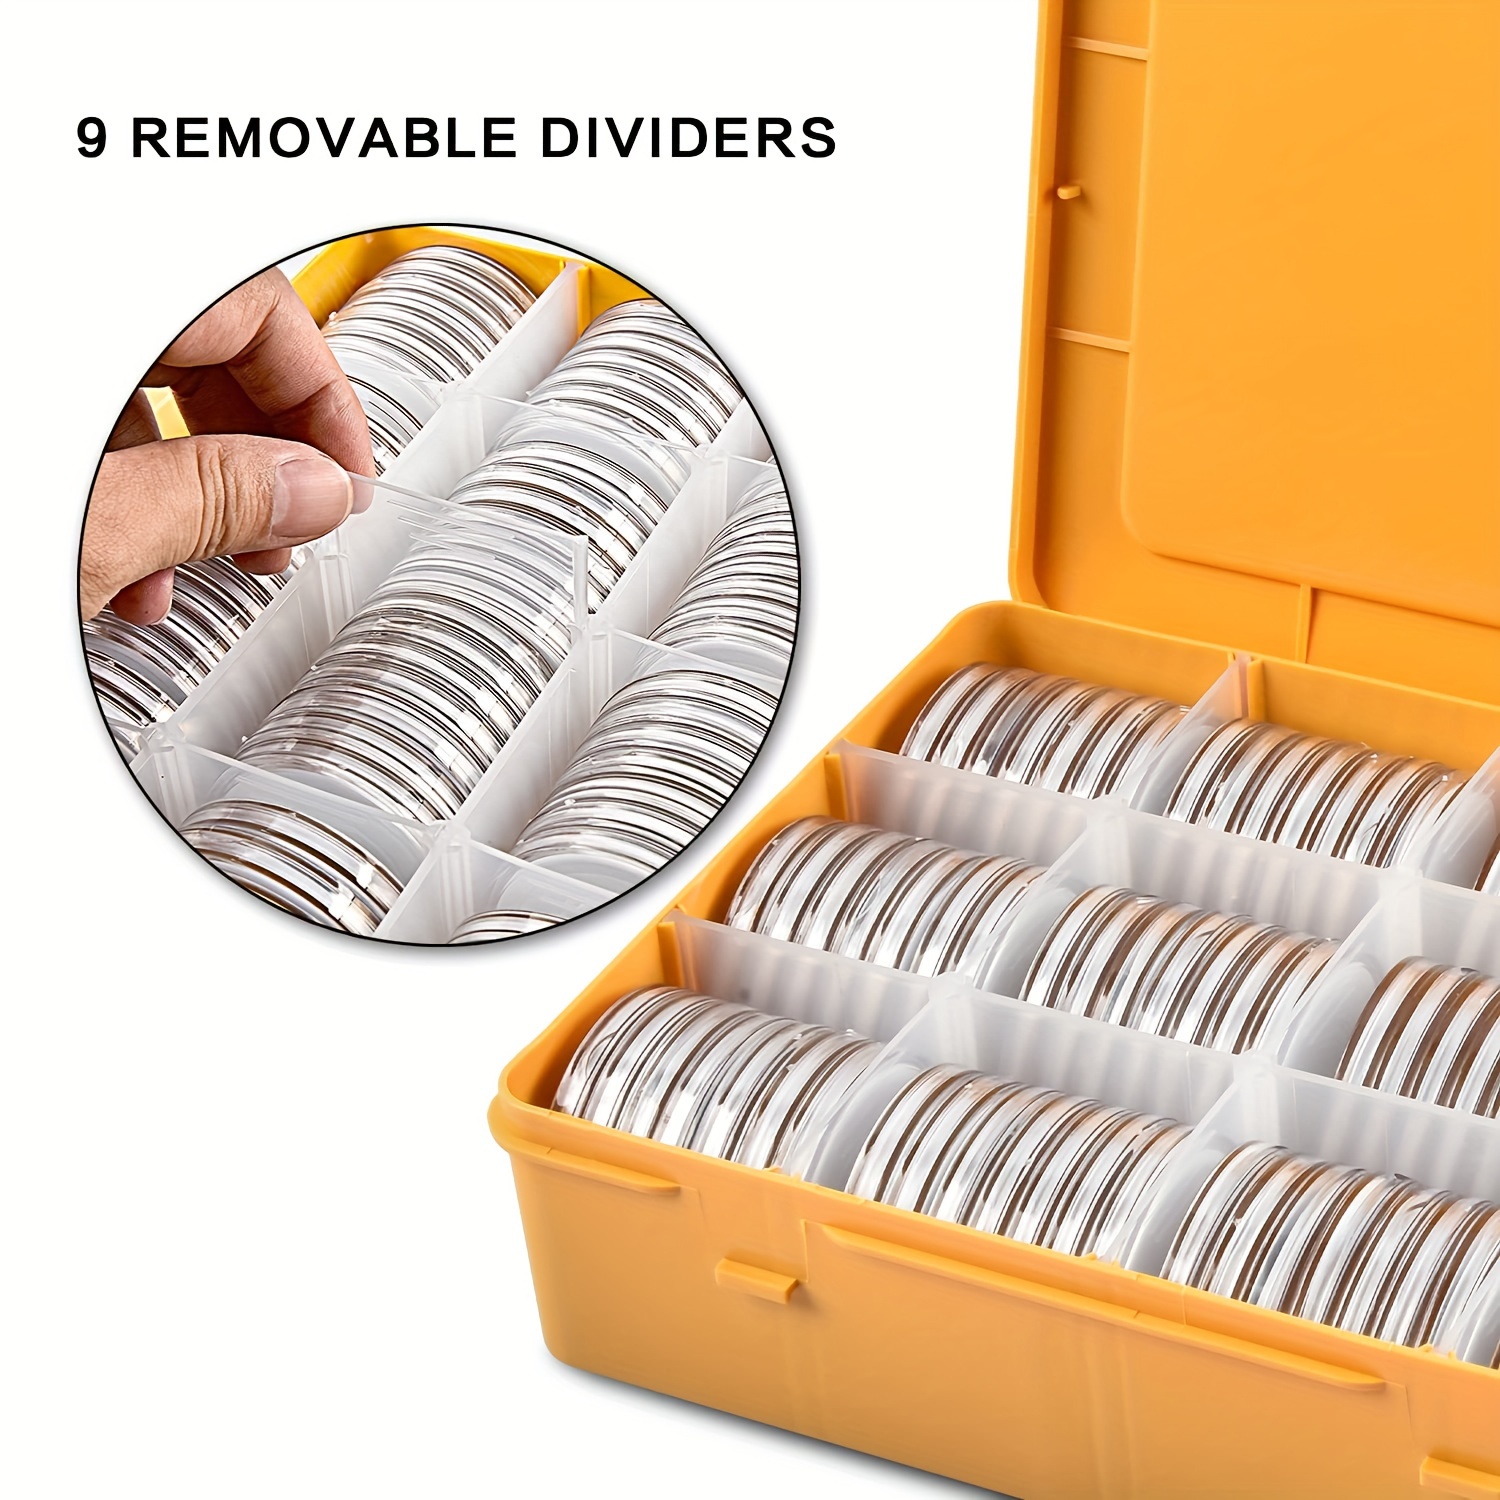 Coin Collection Supplies 40 Pieces 46mm Coin Capsules 8 Sizes Protect Gasket, Coin Holder Case with Storage Organizer Box for Coins Collector(46Mm Coi